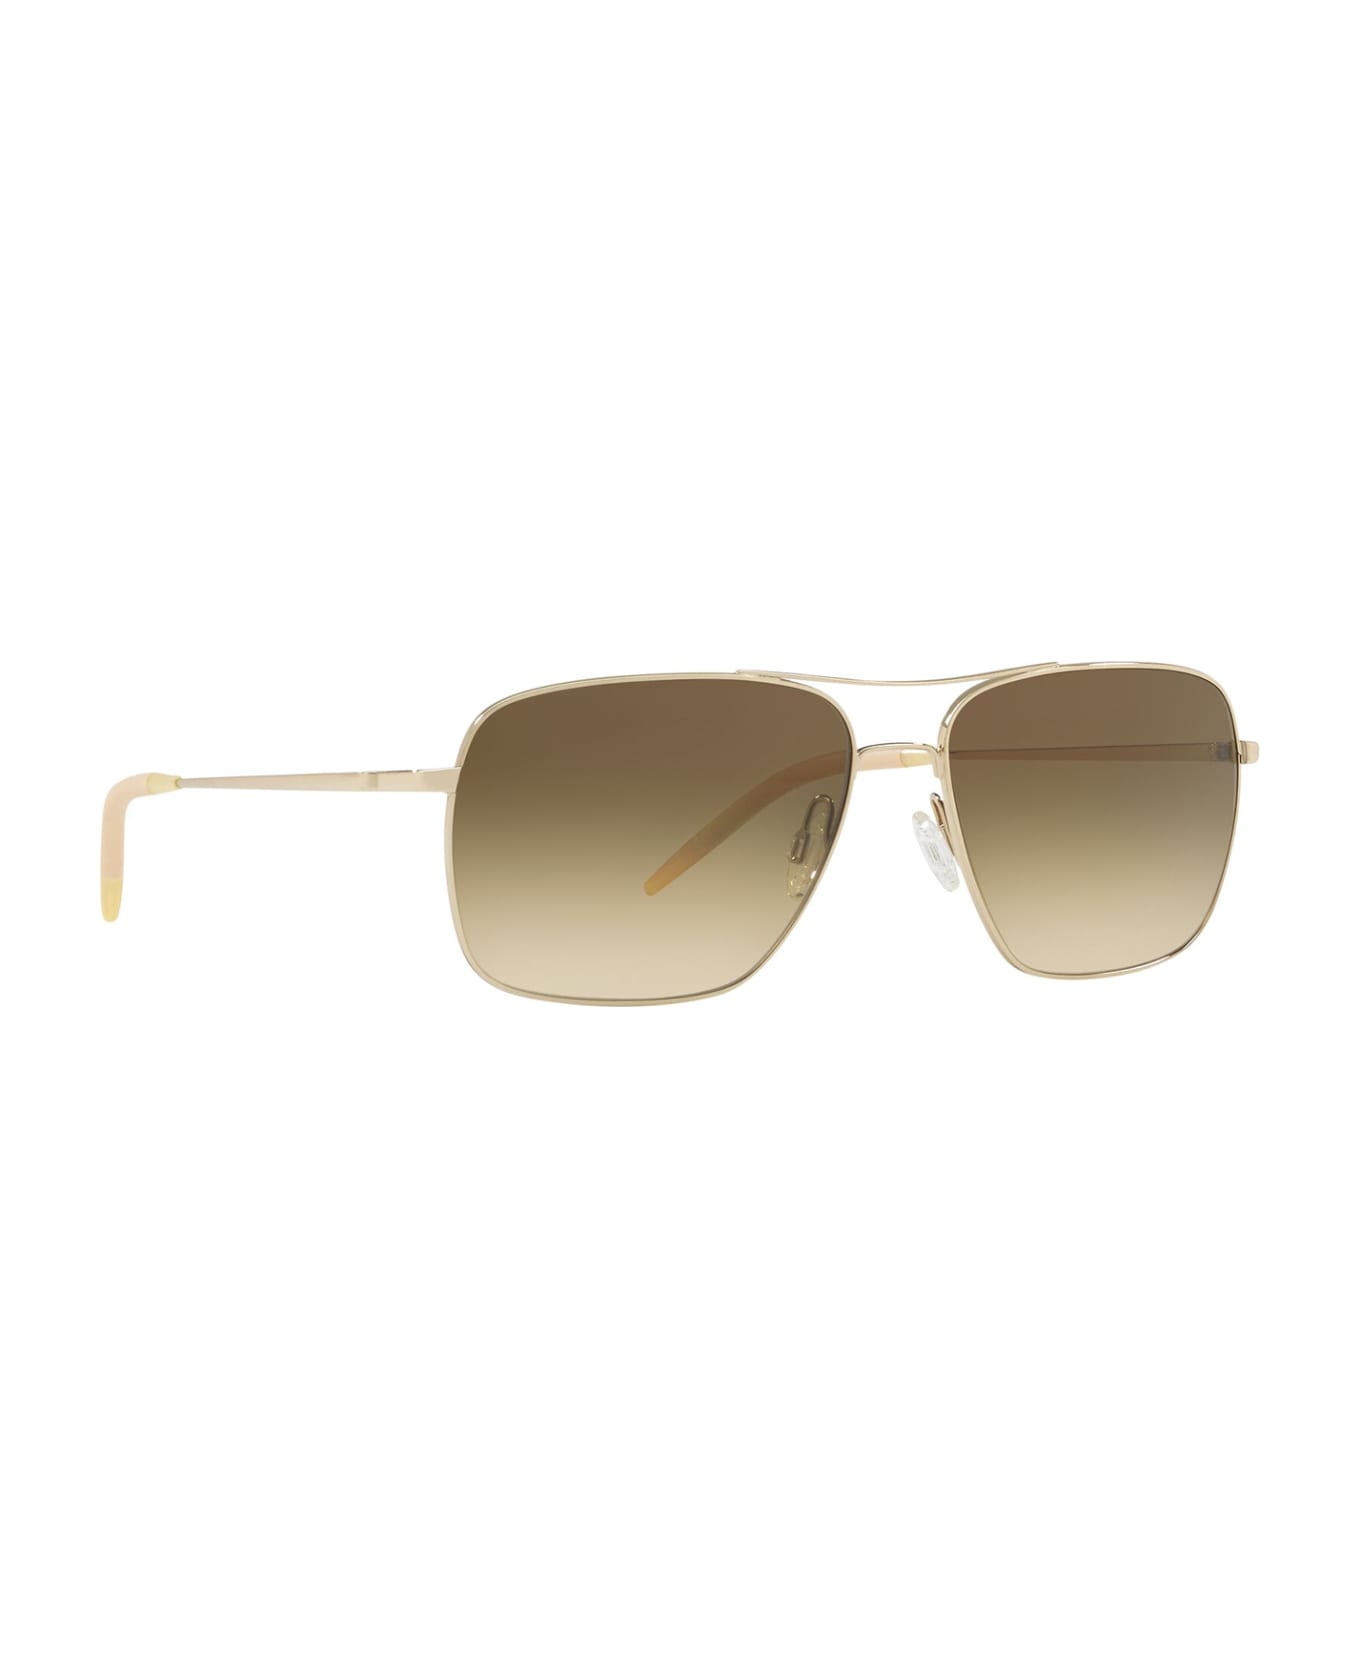 Oliver Peoples Ov1150s Gold Sunglasses - Gold サングラス